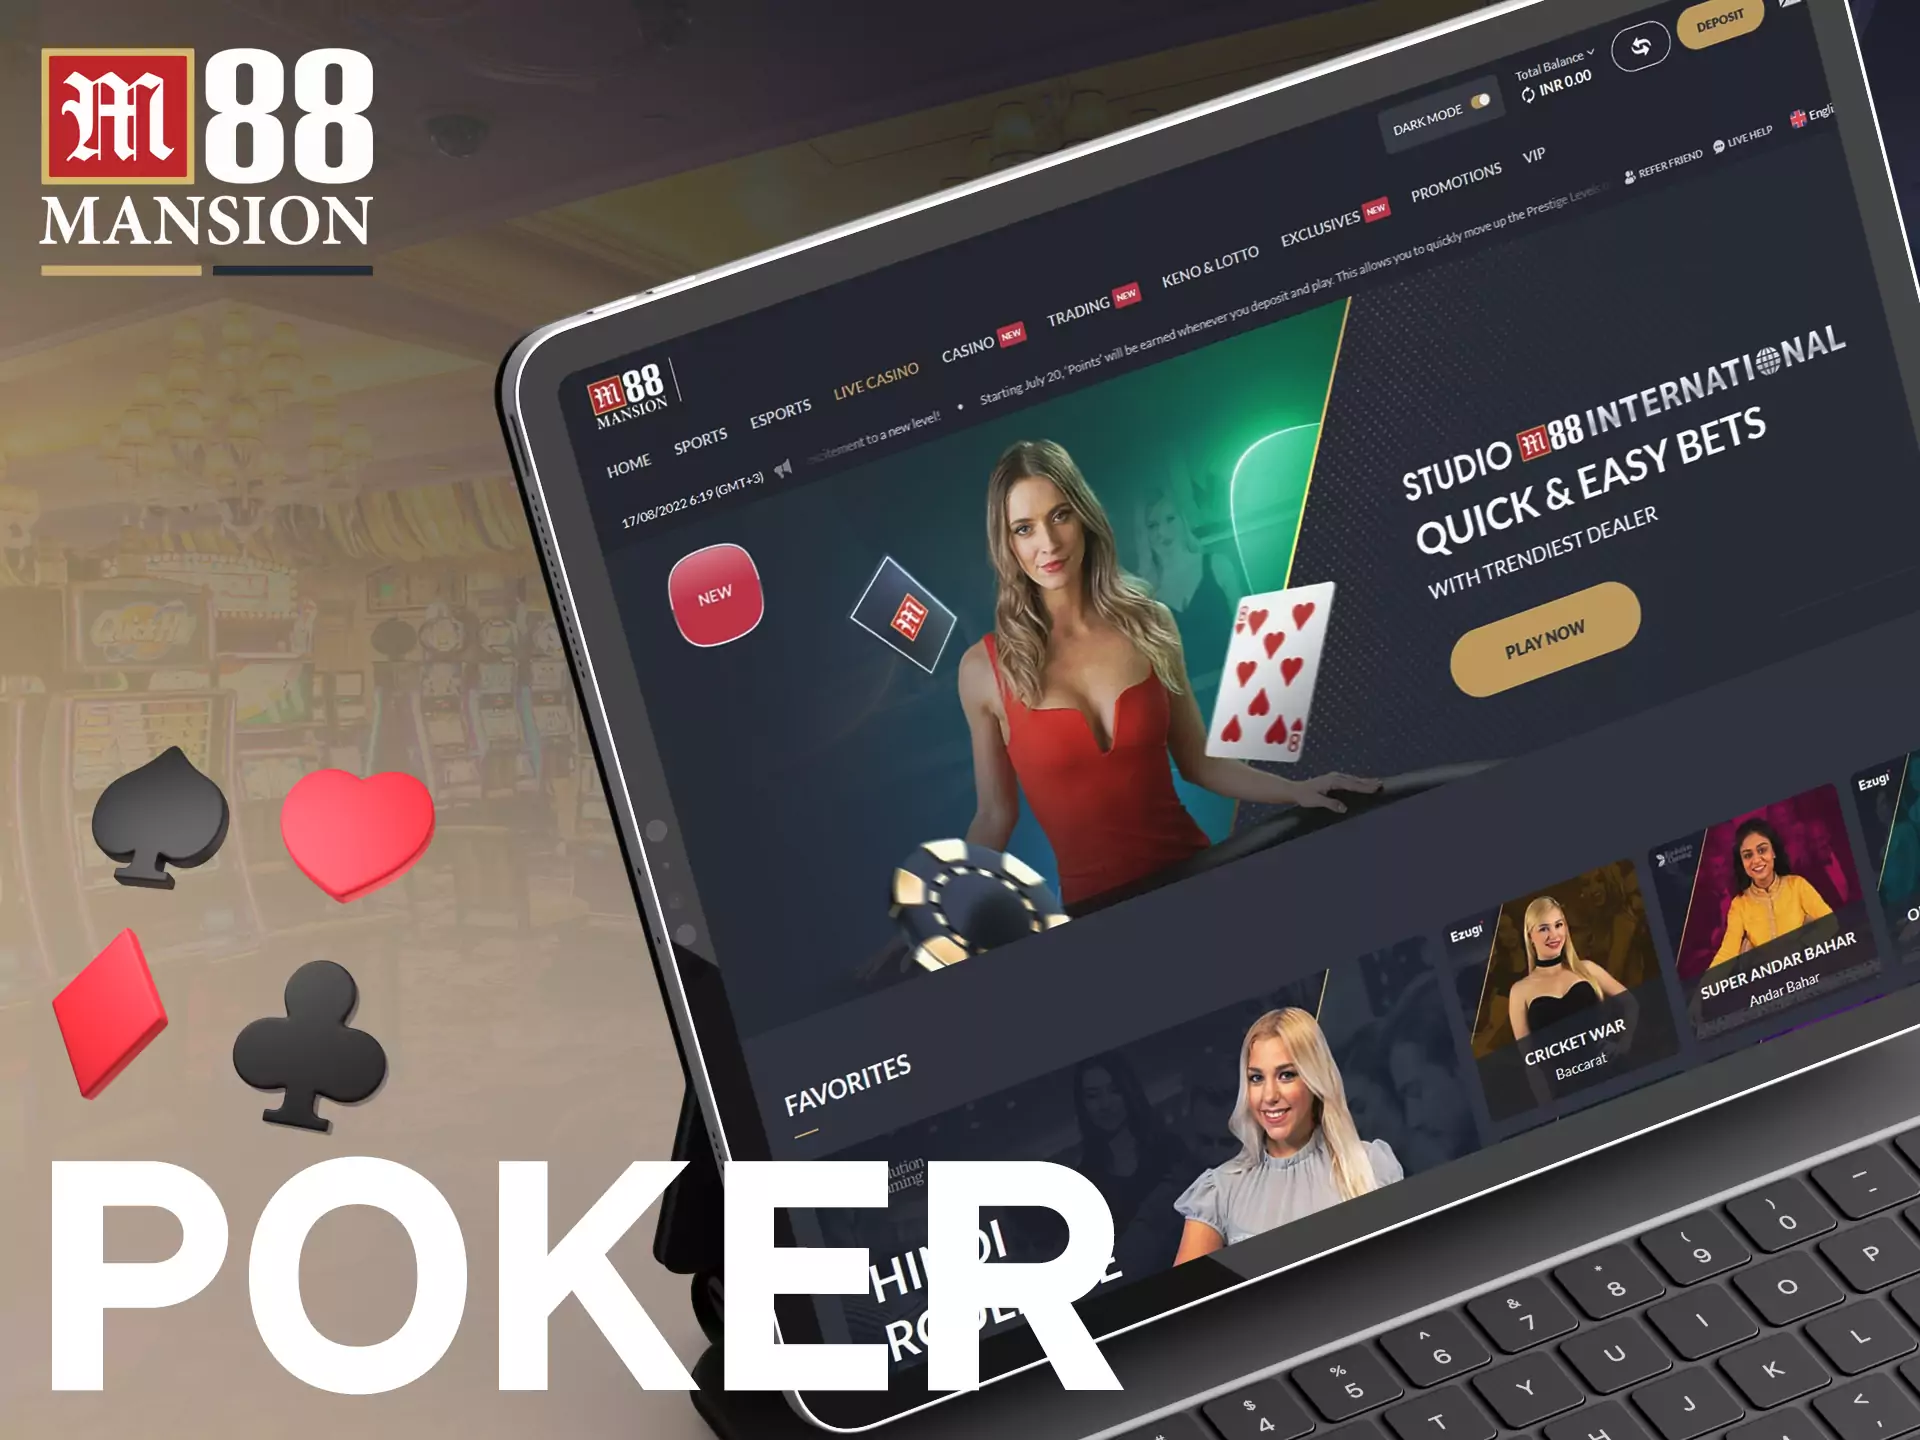 You can play poker with a real dealer in the M88 Live Casino room.